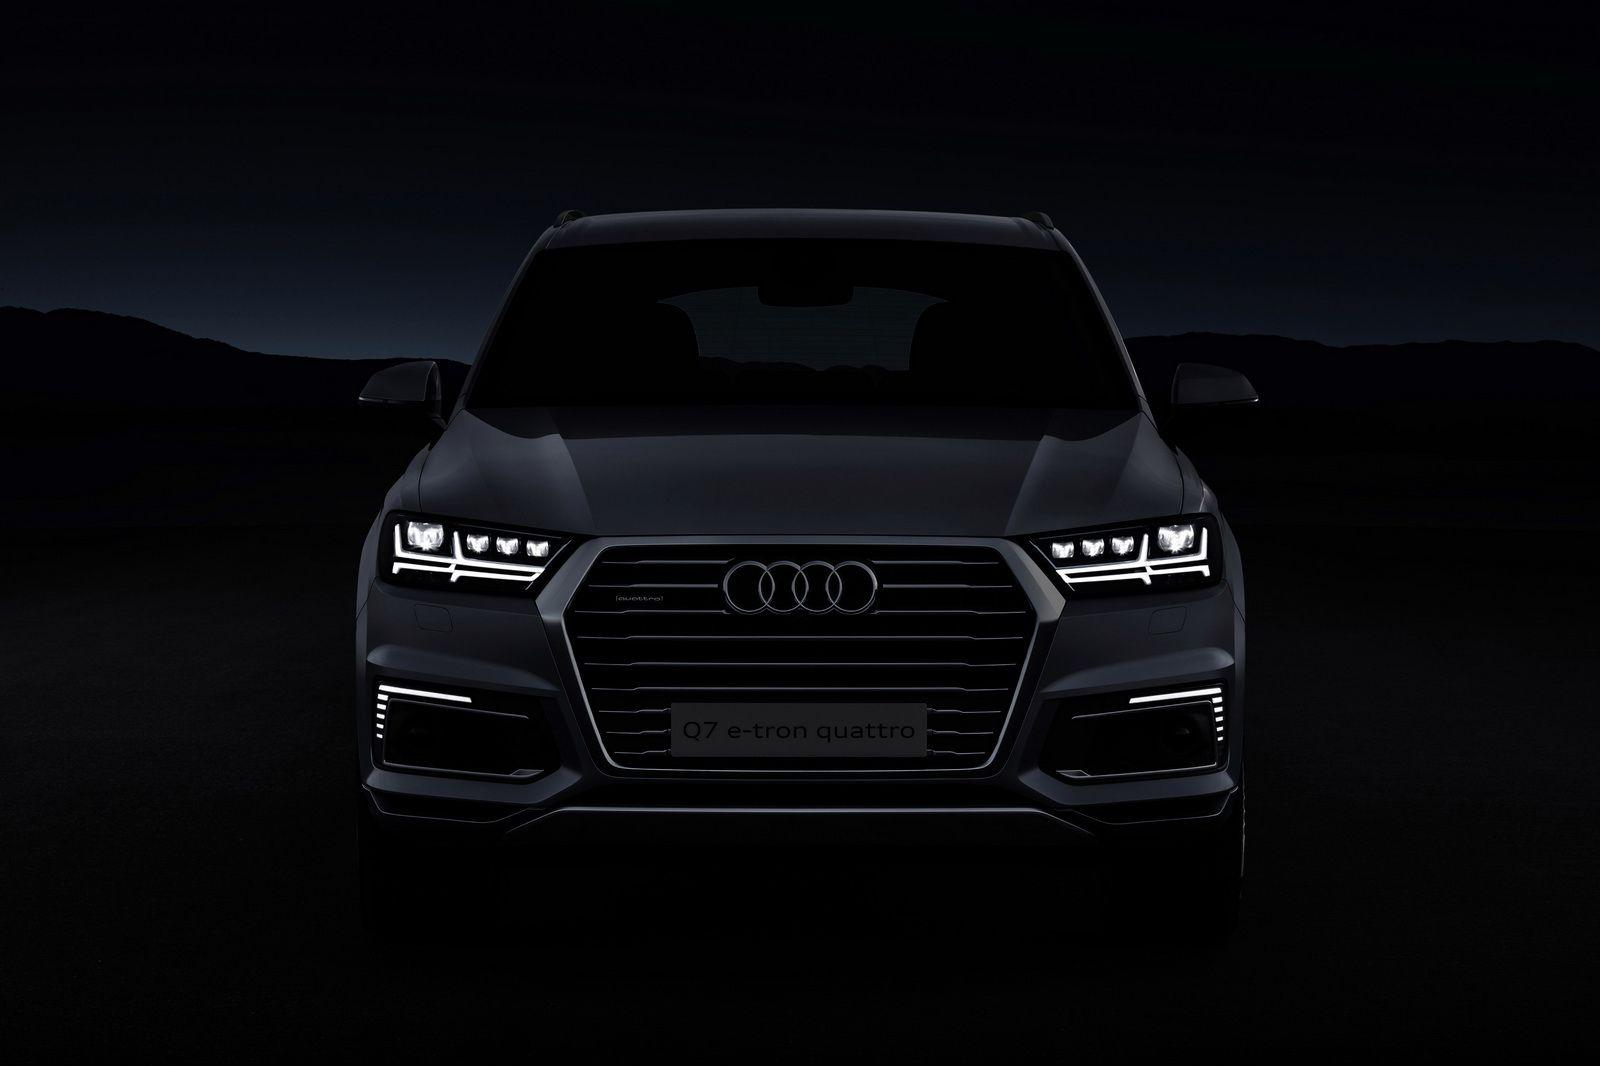 362HP Audi Q7 E Tron 2.0 TFSI Quattro PHEV Is For Asian Markets Only